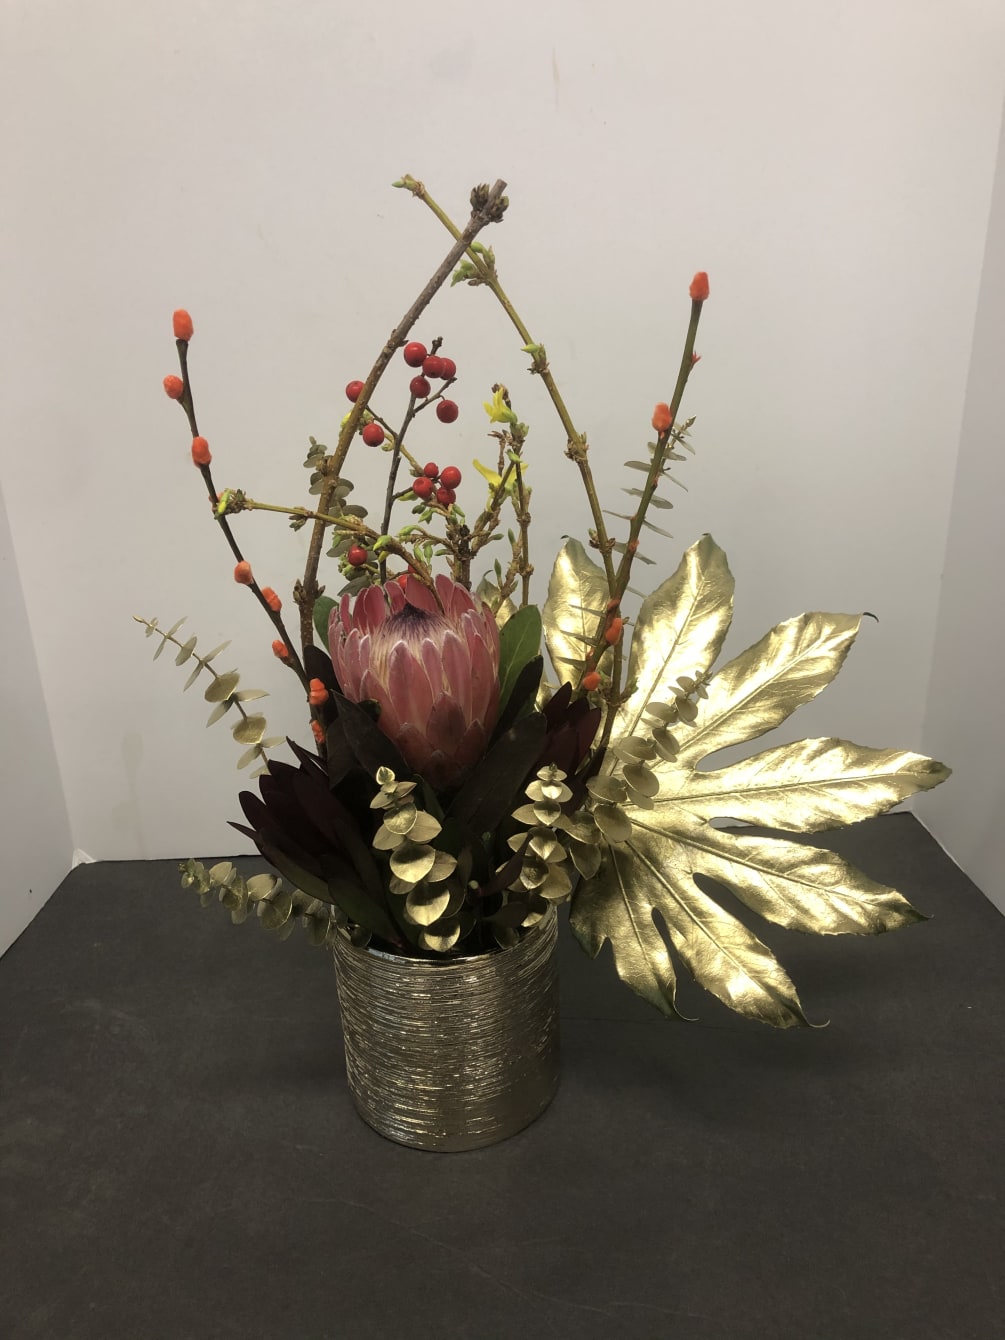 Chinese New Year arrangement 
Send happiness to the ones you love